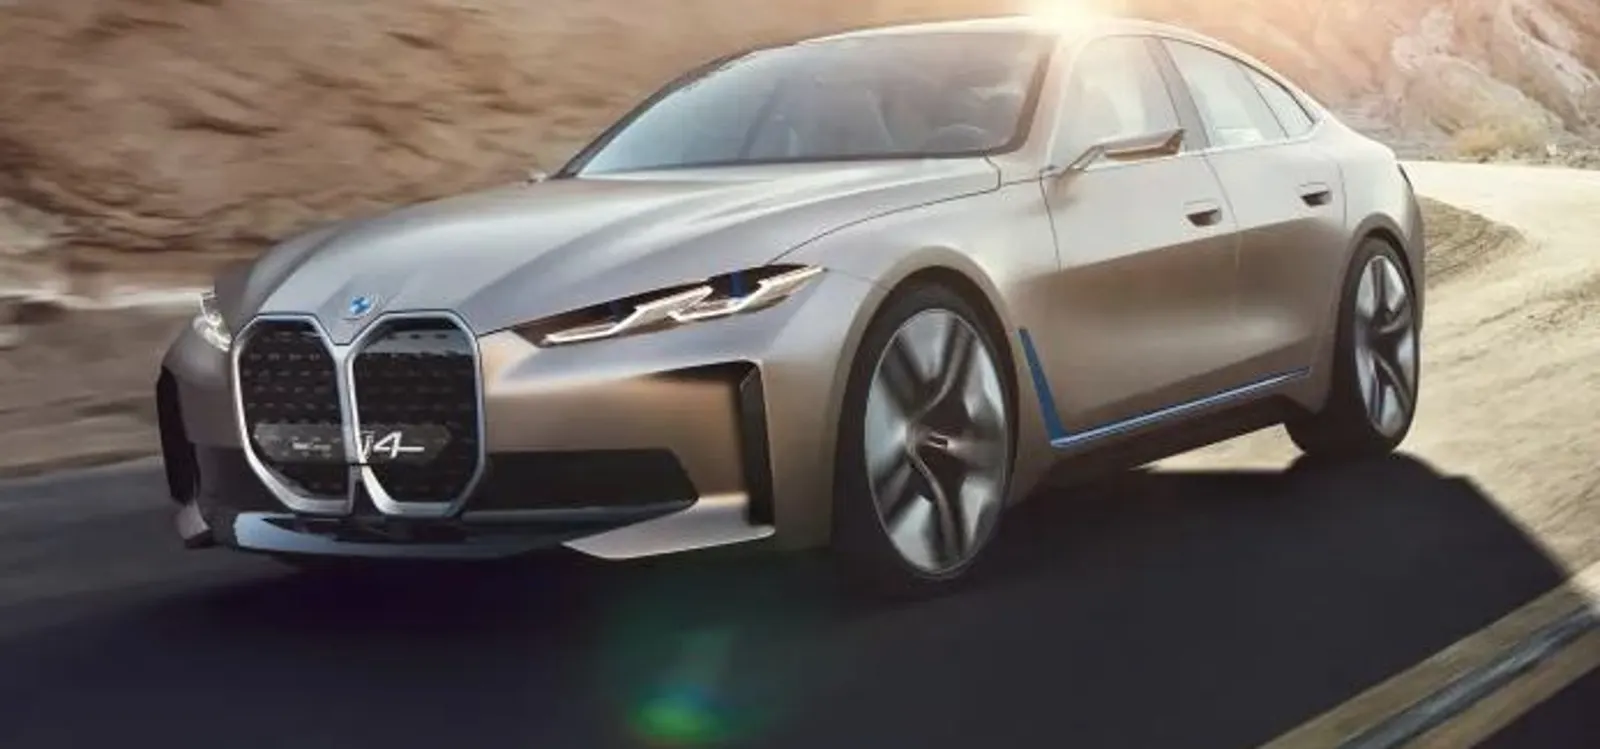 BMW's Electric Avenue Outpacing Rivals in the Race to Electrification